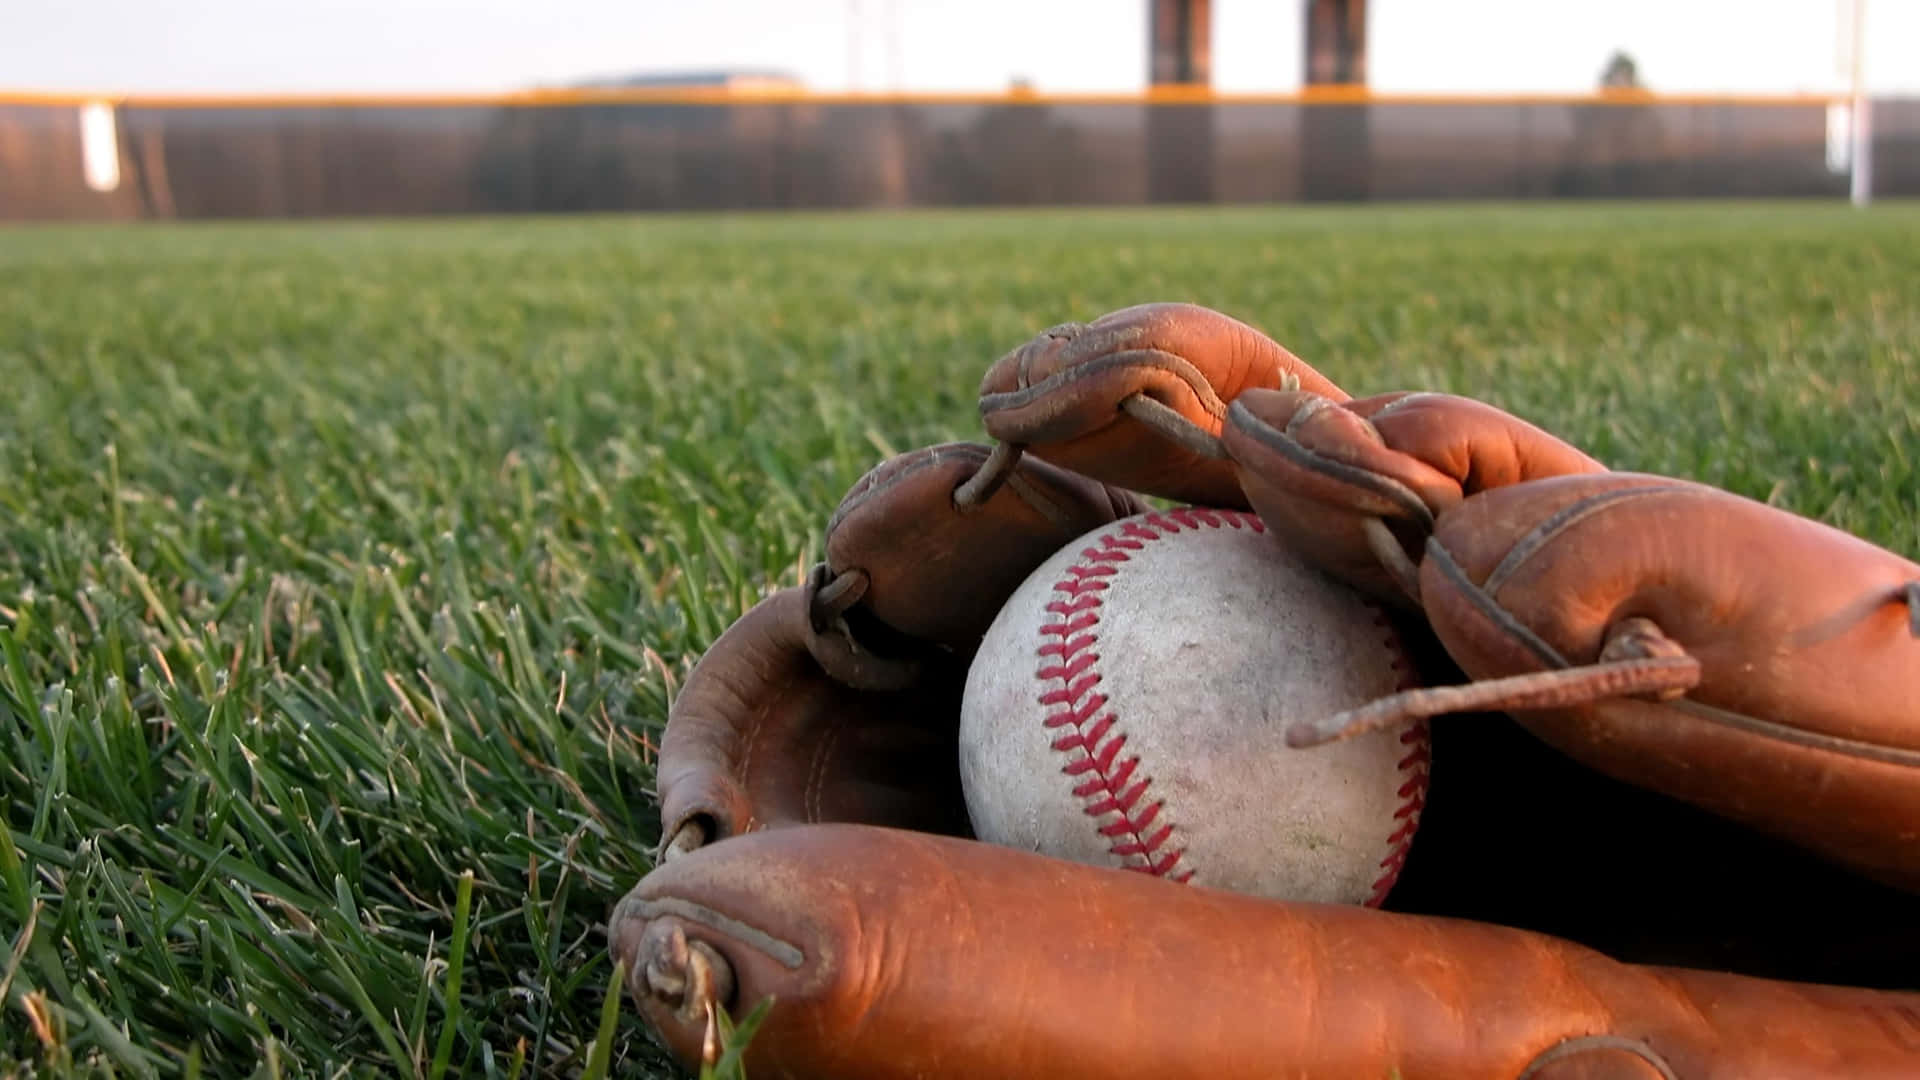 A collection of baseball gloves on display in various colors and sizes Wallpaper